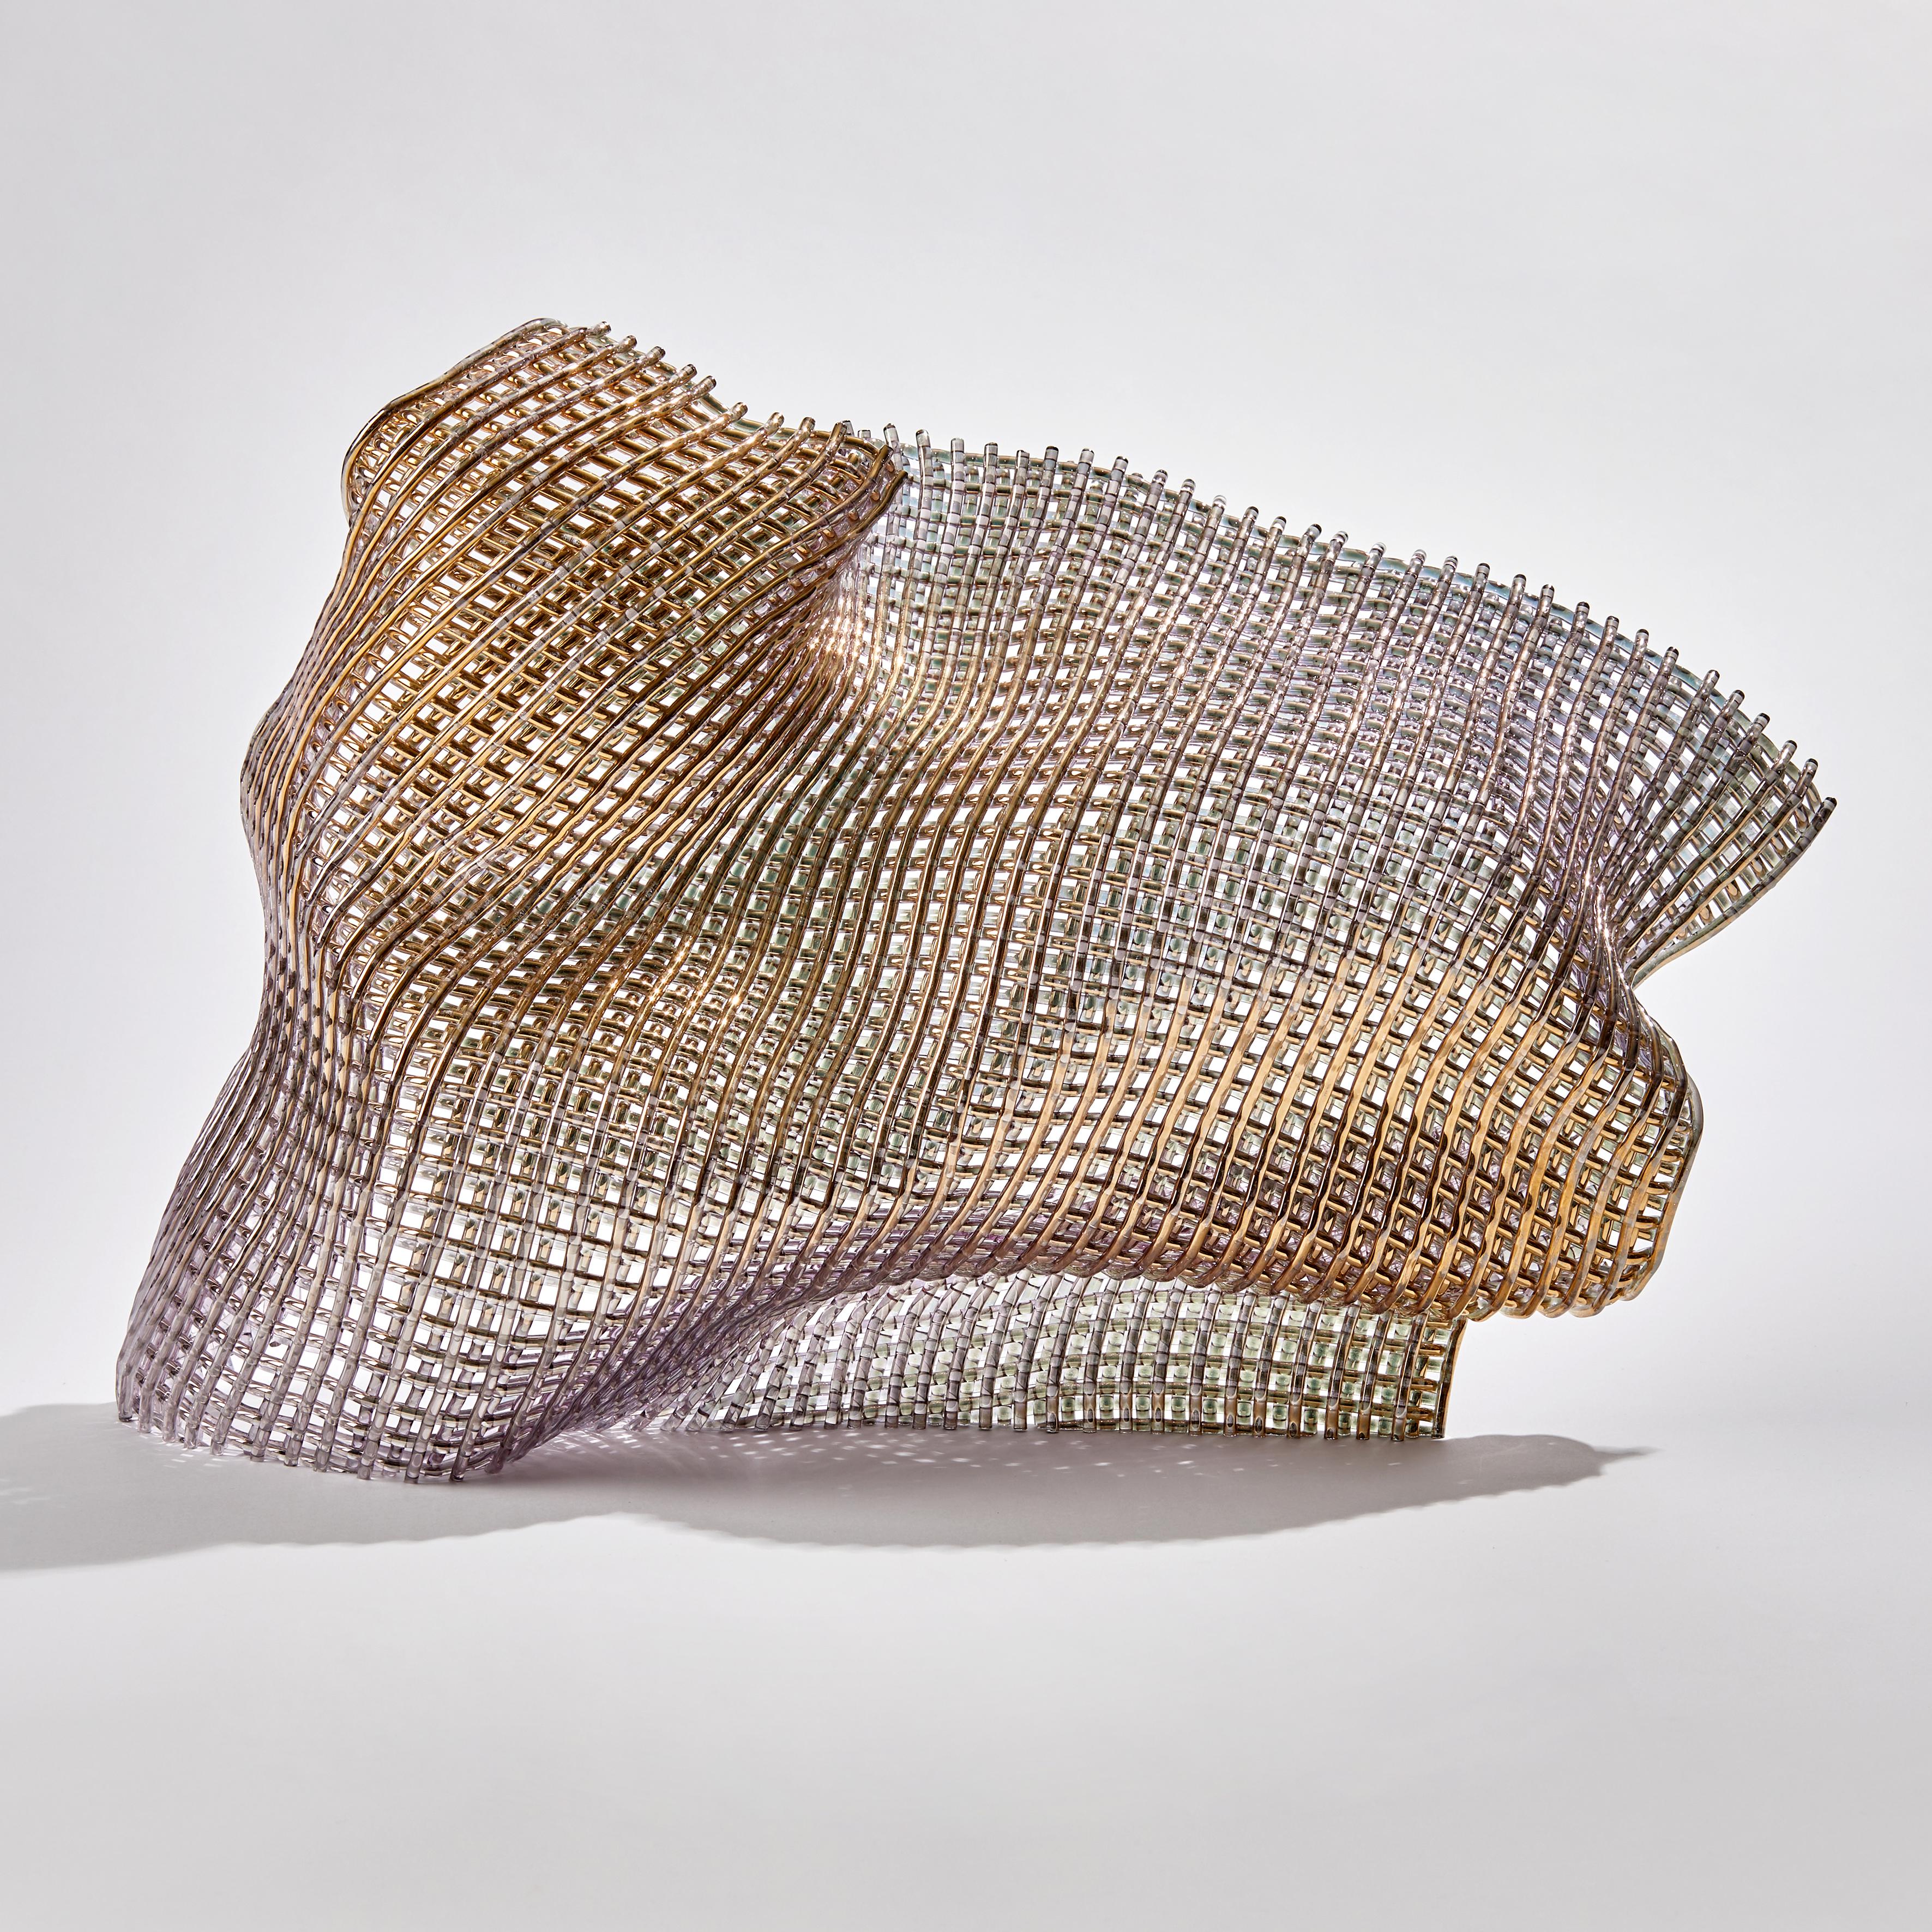 Synchronous I, is a unique gold and glass sculpture by the British artist Cathryn Shilling. Using her signature woven glass 'fabric' technique, Shilling layers kiln formed glass cane to create this beautiful latticed artwork, which has been finished